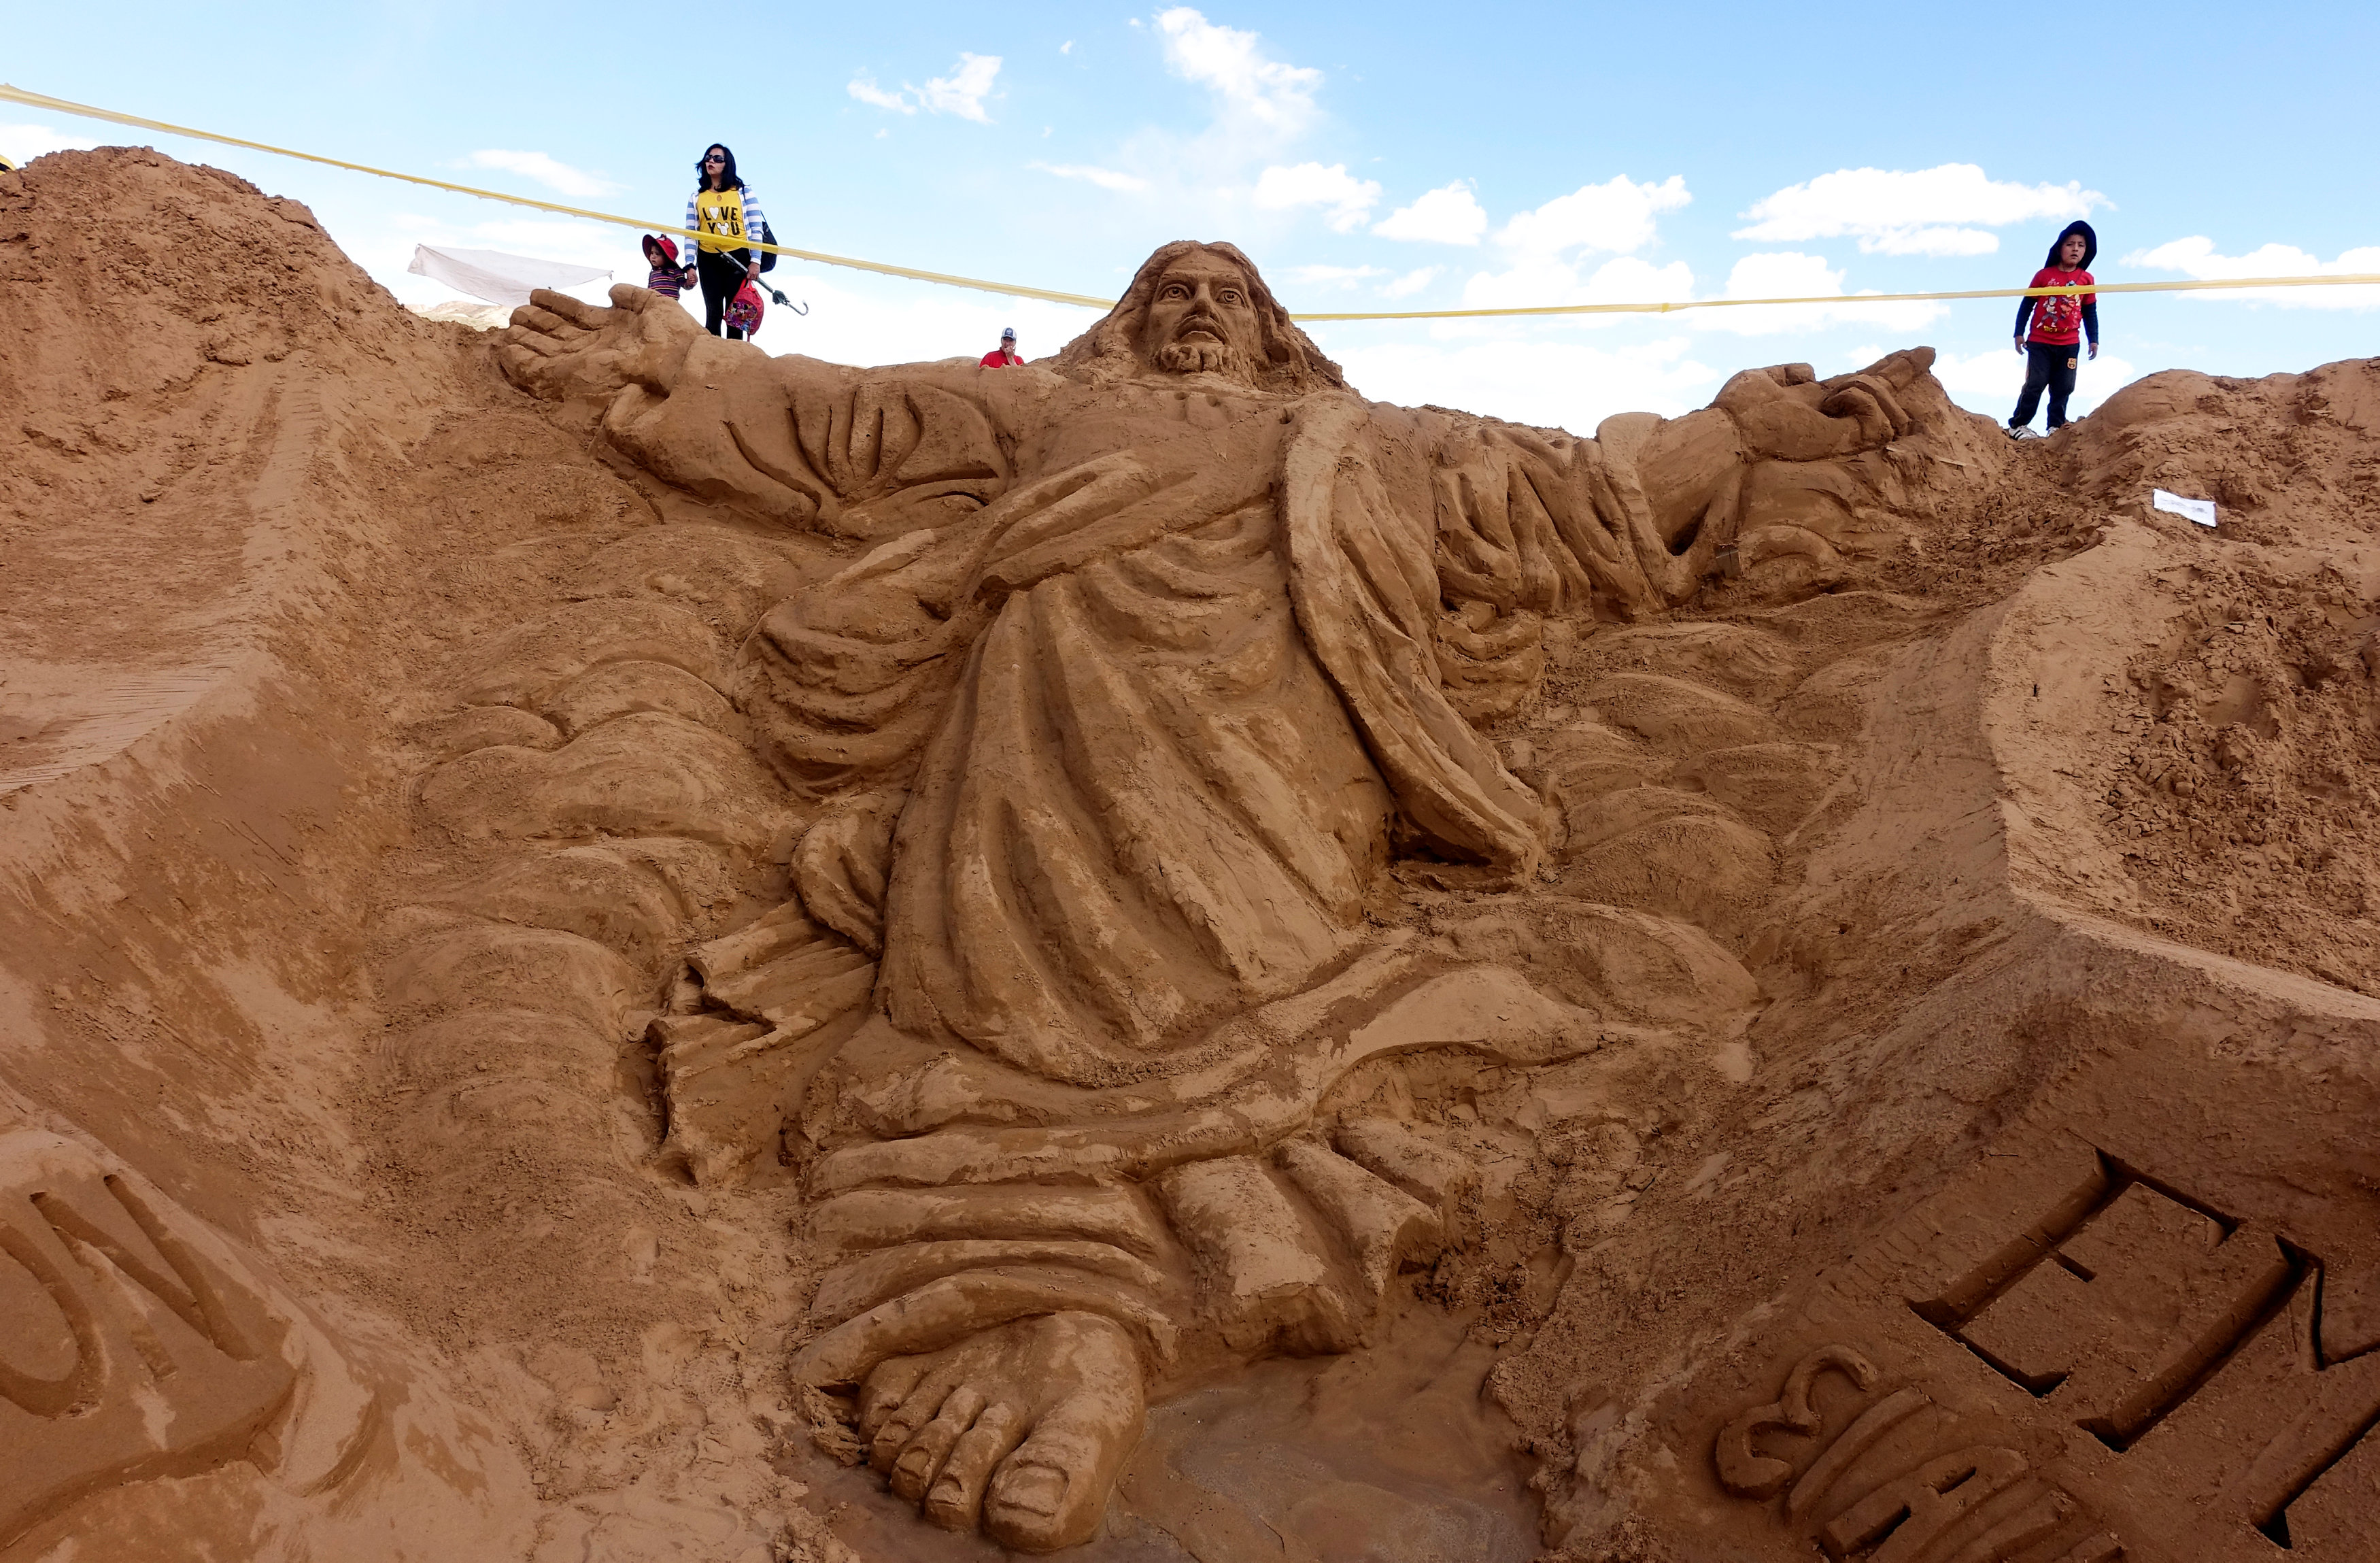 A sand sculpture that depicts Jesus Christ is pictured during Holy Week celebrations in the Arenal de Cochiraya, on the outskirts of Oruro, Bolivia. PHOTO: REUTERS